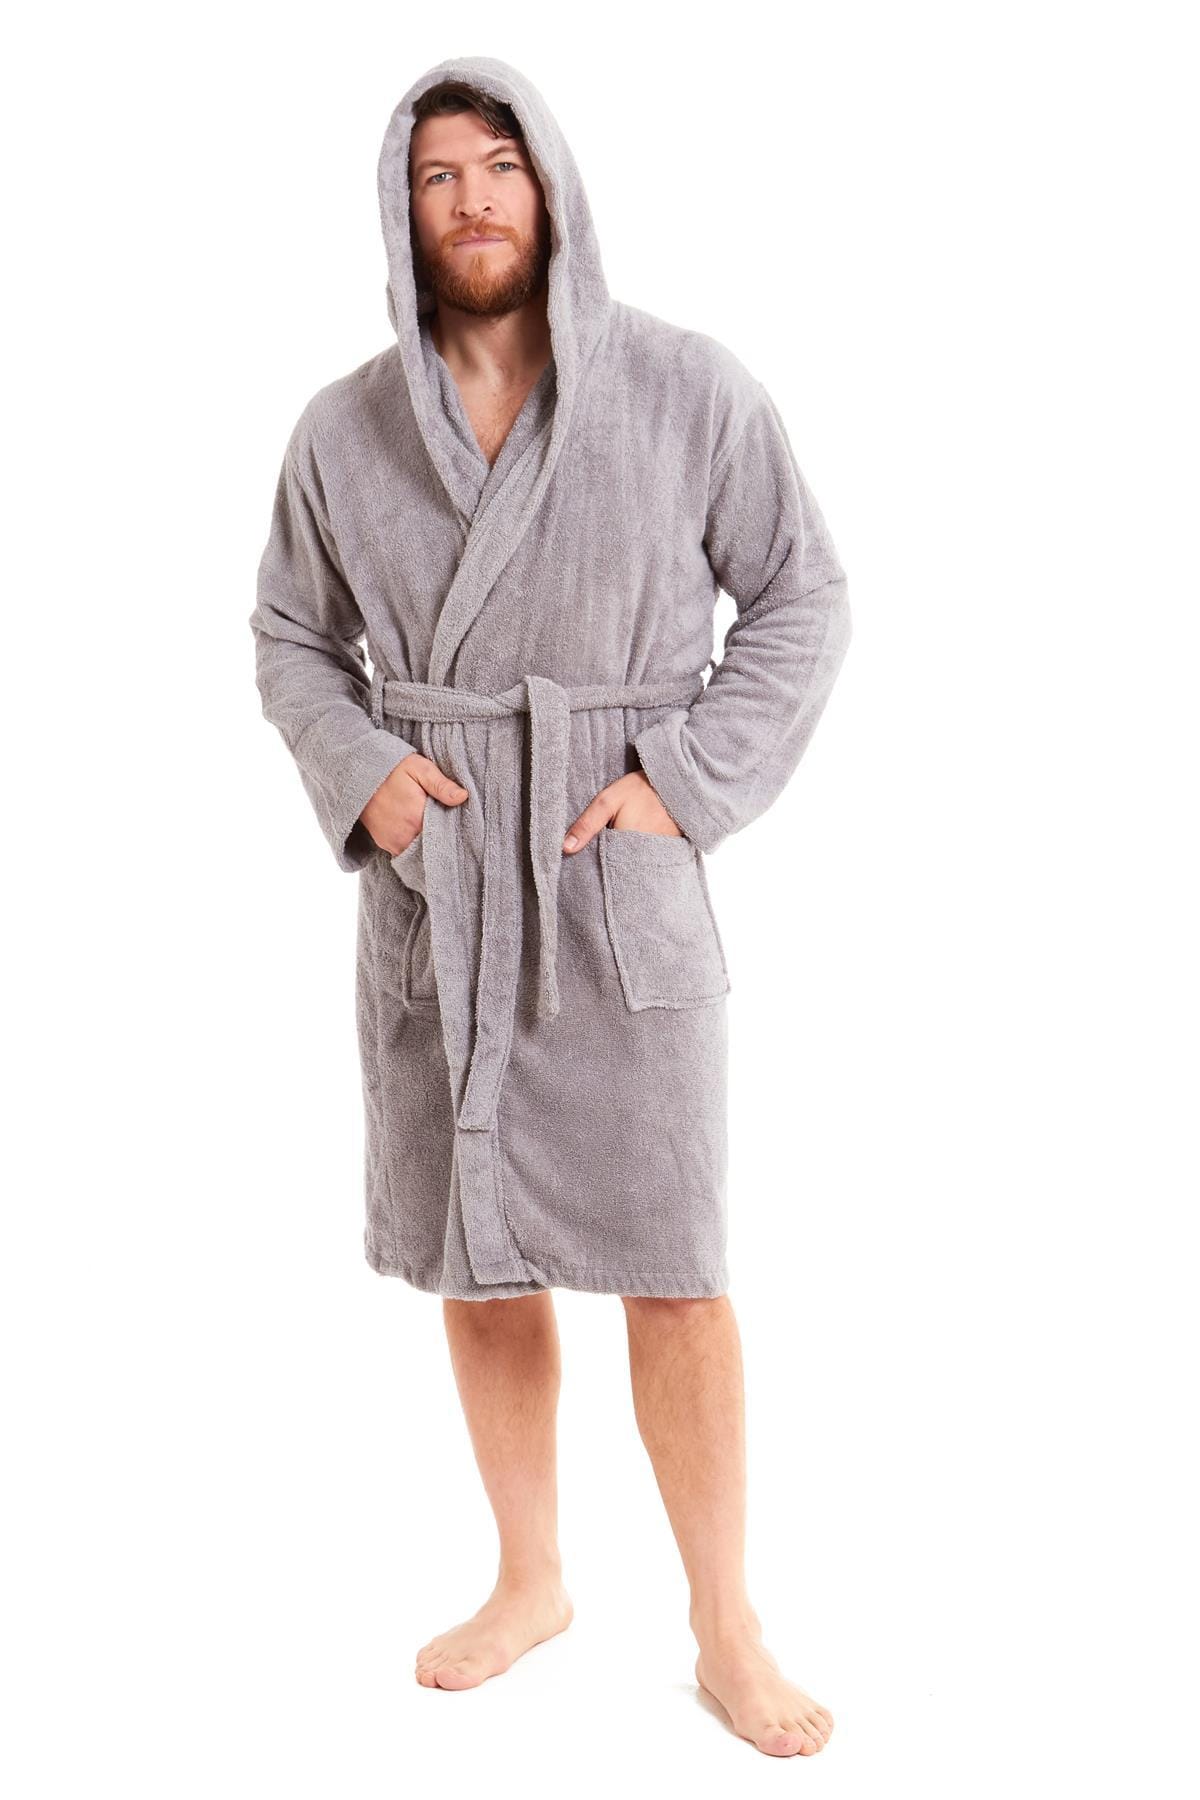 Mens Luxury Bamboo Hooded Towelling Robe MEDIUM | LARGE / GREY Daisy Dreamer Dressing Gown